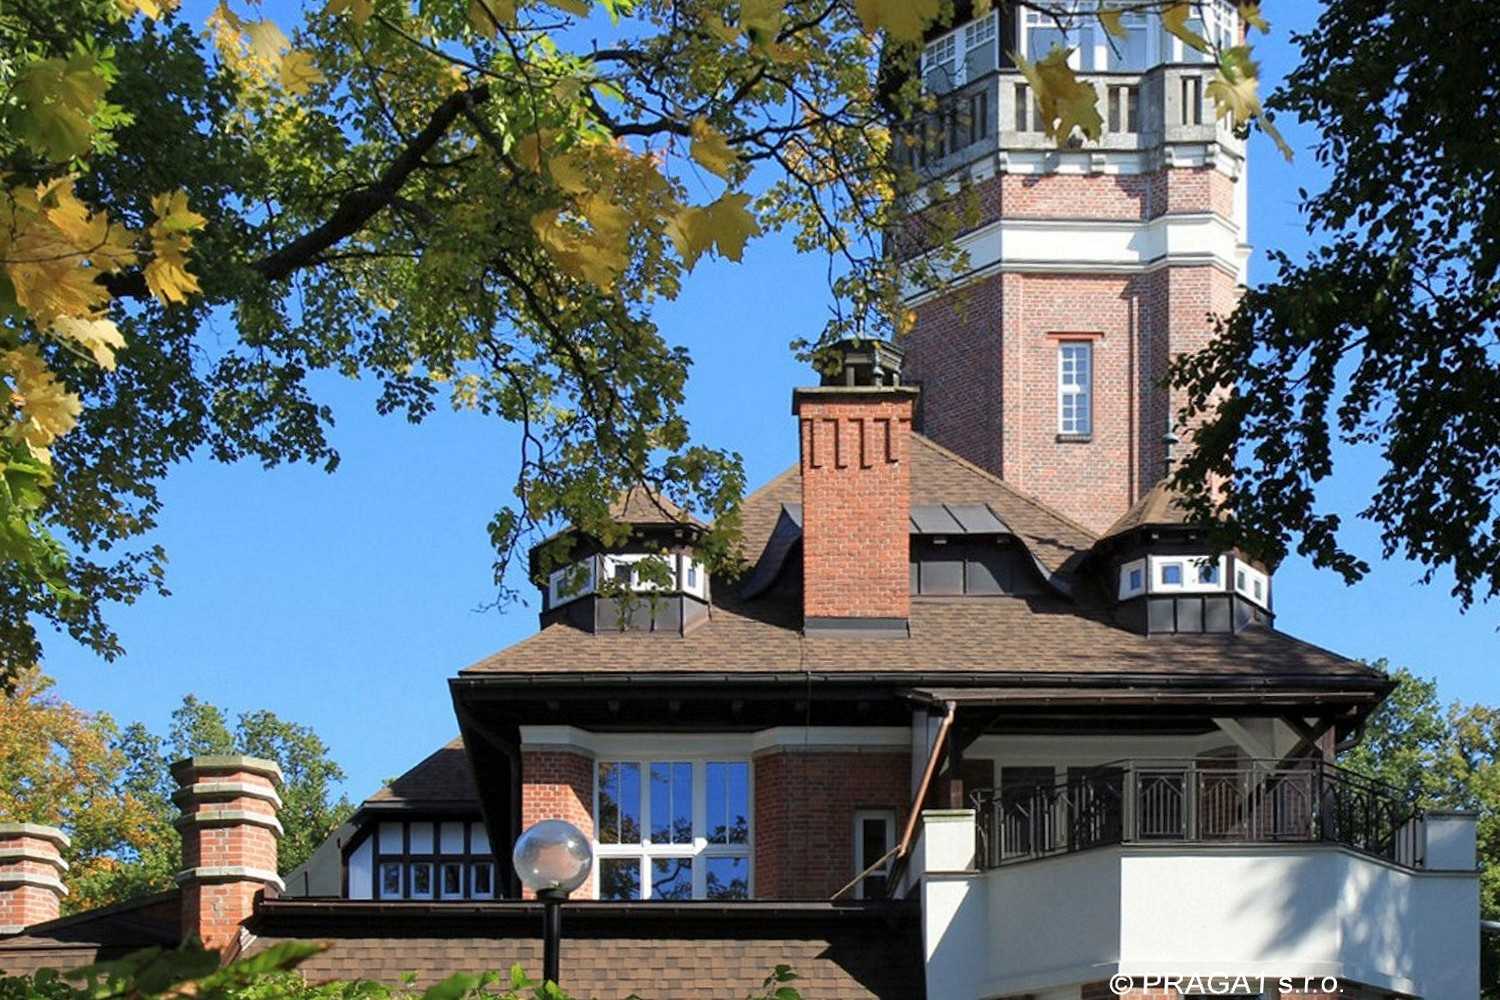 Obrázky Forest Villa with Observation Tower